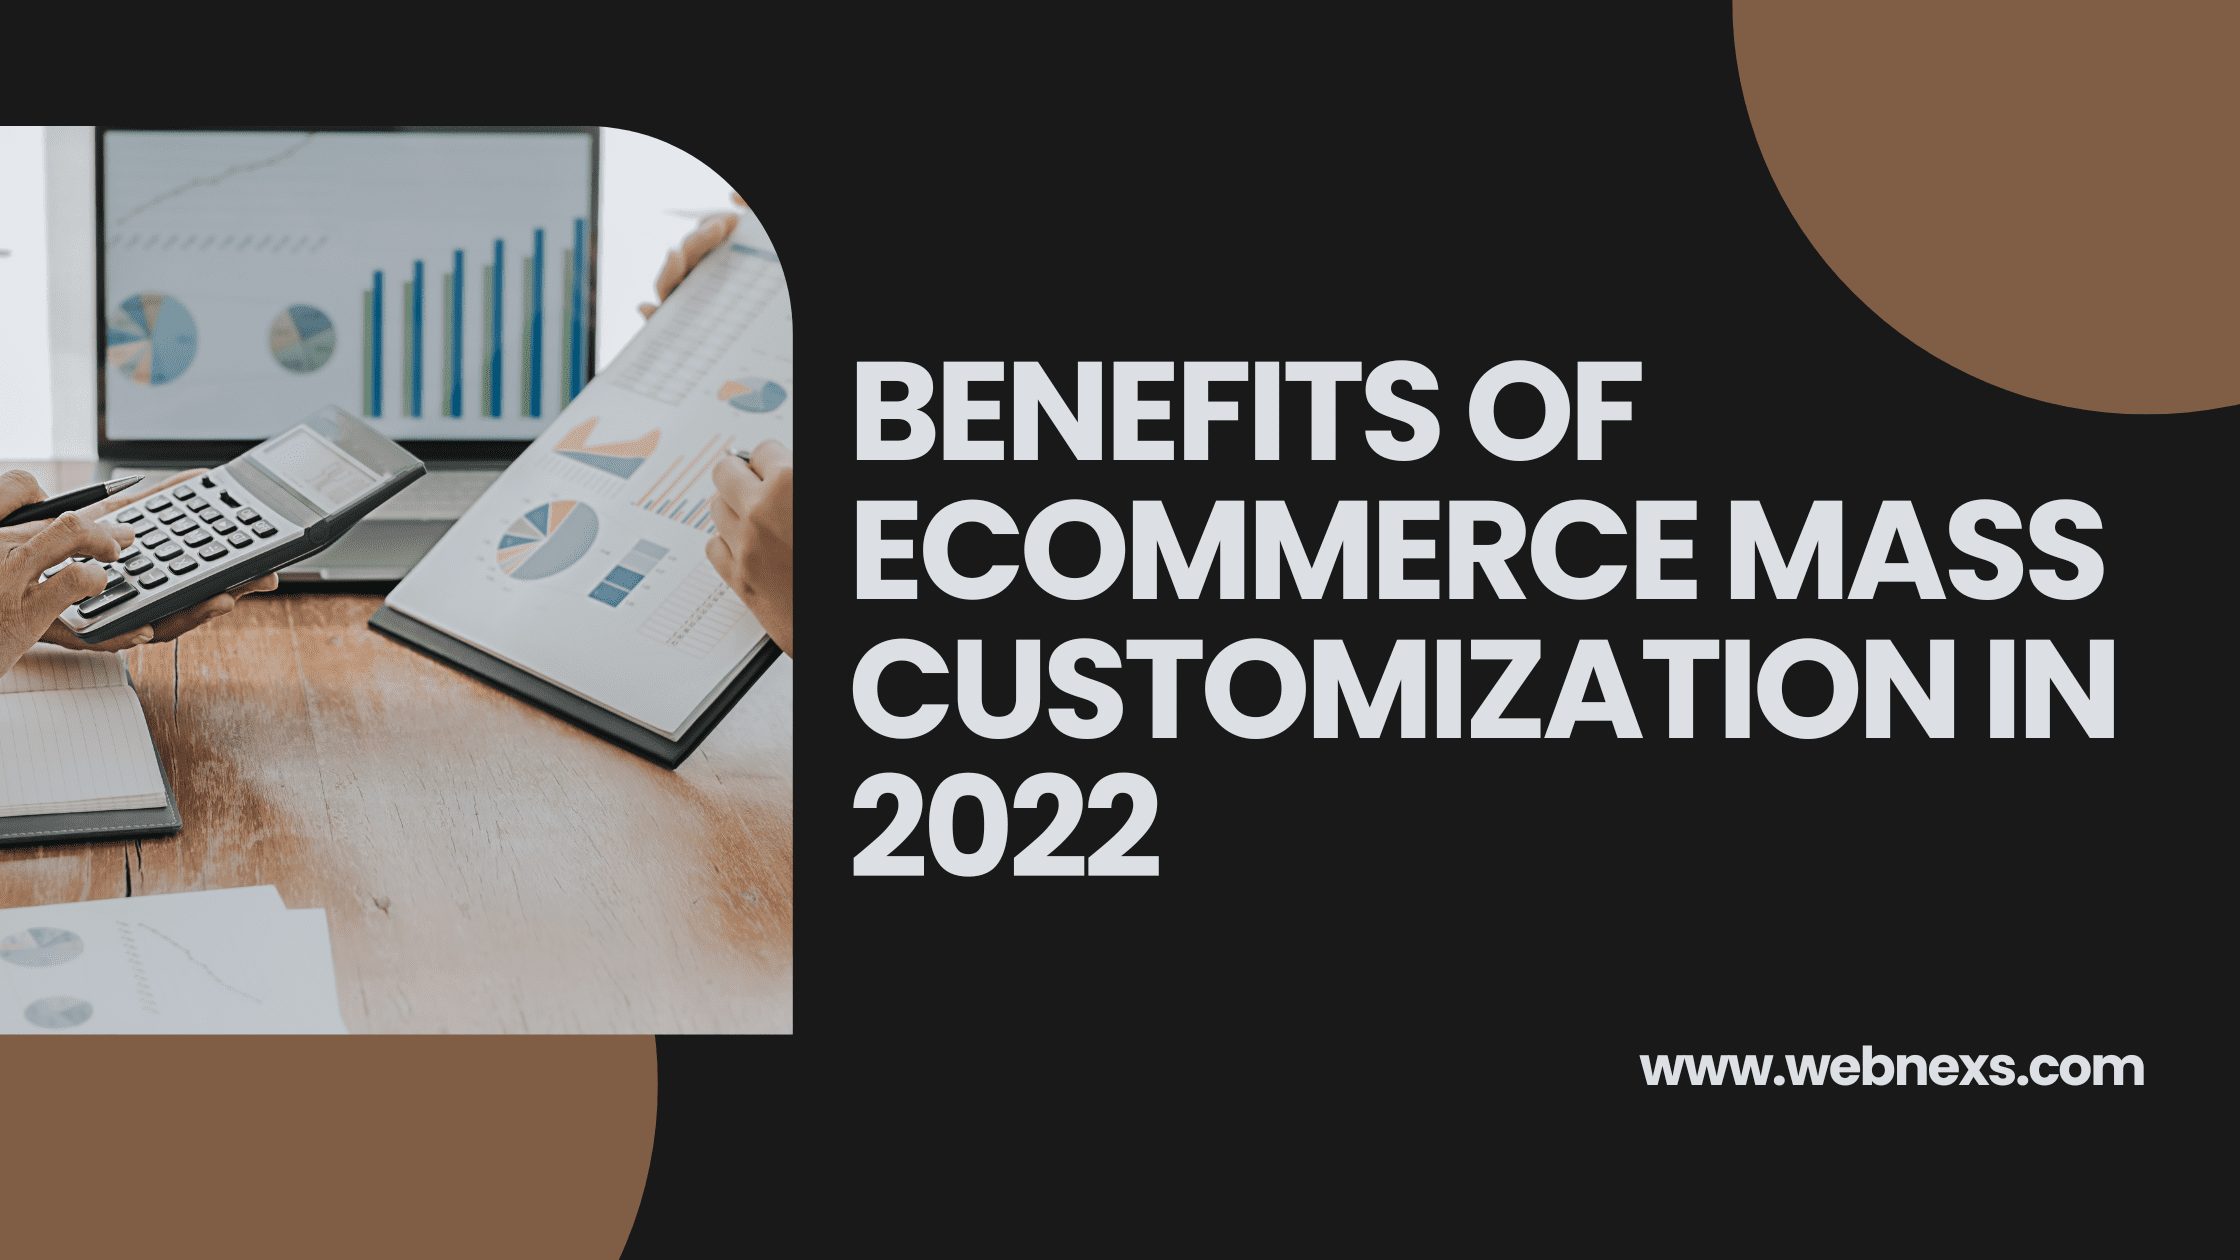 Top 5 Benefits Of Ecommerce Mass Customization In 2022